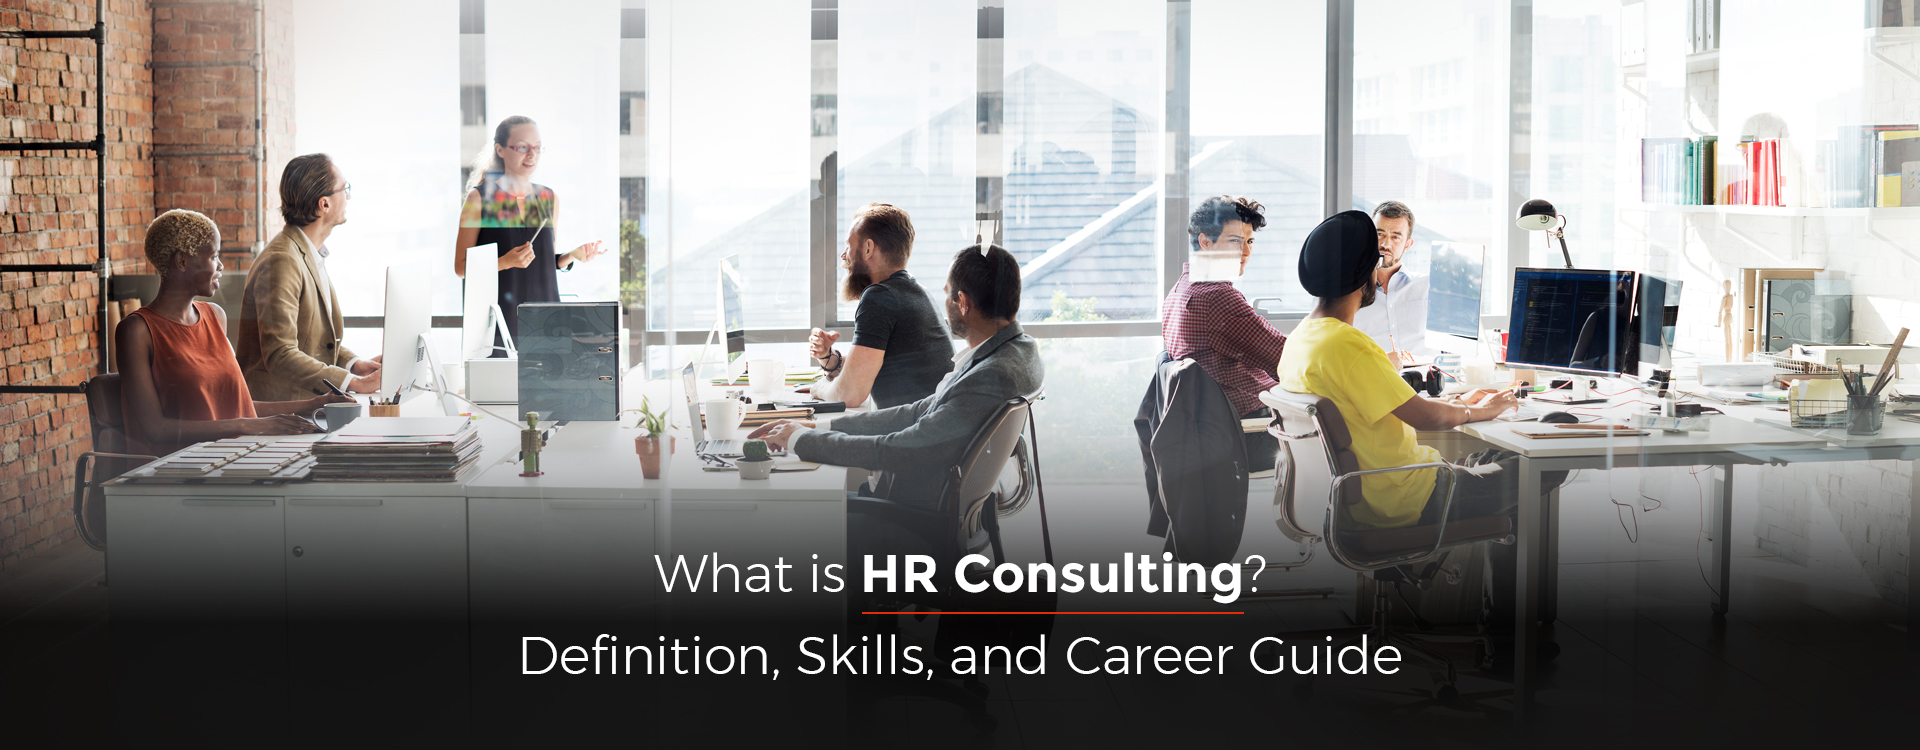 What Is HR Consulting? Definition, Skills, and Career Guide